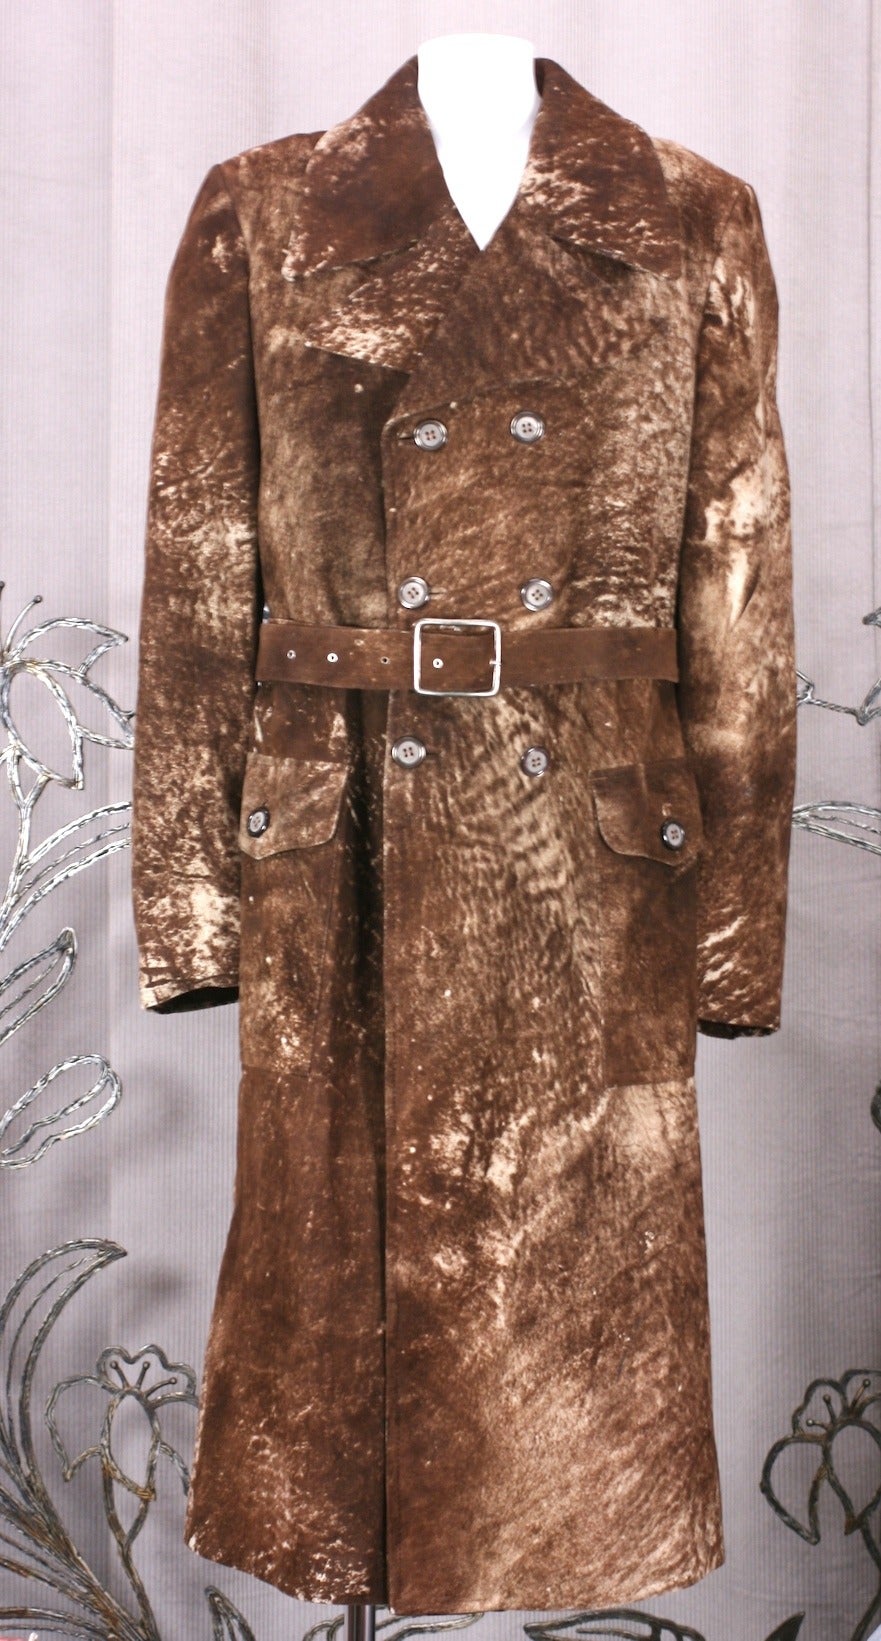 Amazing trompe l'oiel mens double breasted belted coat in suede printed to look like pony skin. Strong shouldered, long and lean cut with large patch pockets on hips and matching belt. 
An incredibly elegant coat which can be styled in so many